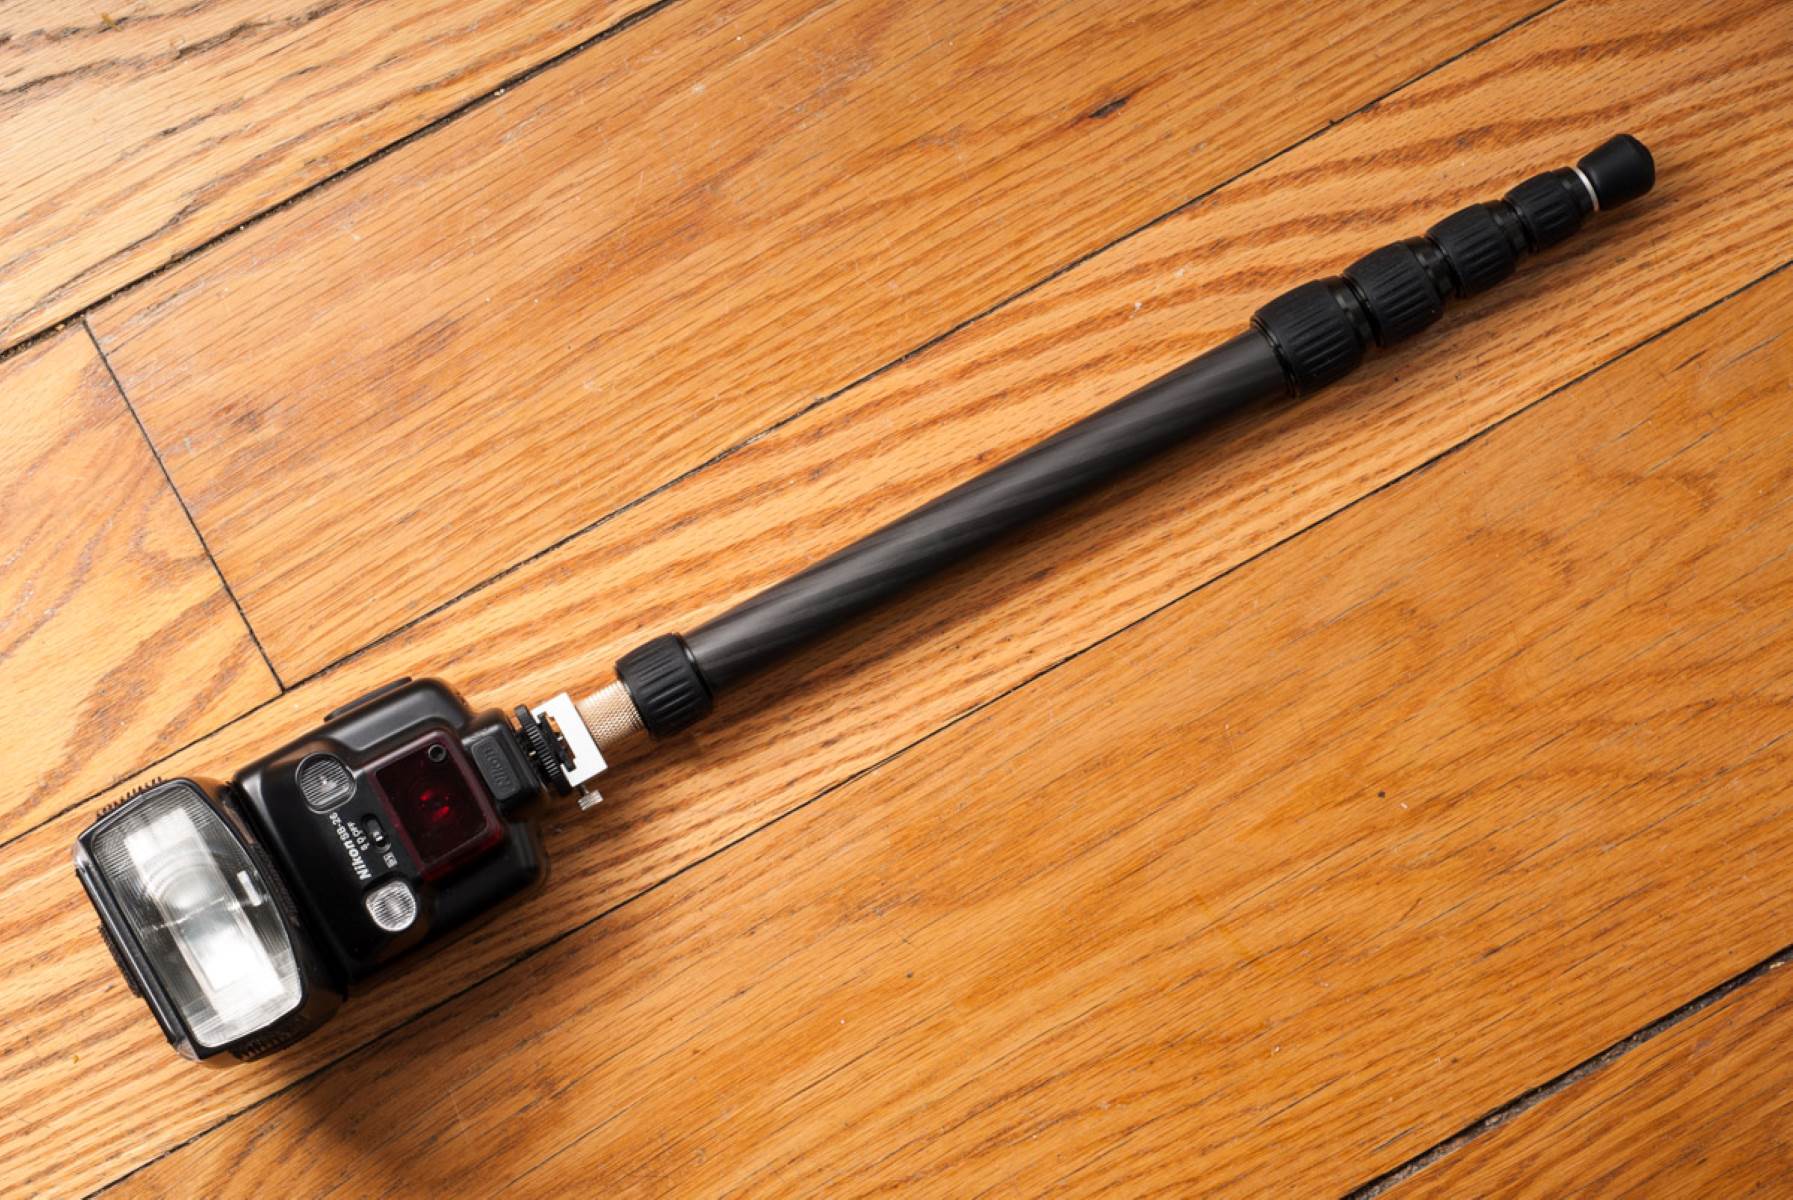 attaching-a-speedlight-to-your-monopod-a-practical-guide